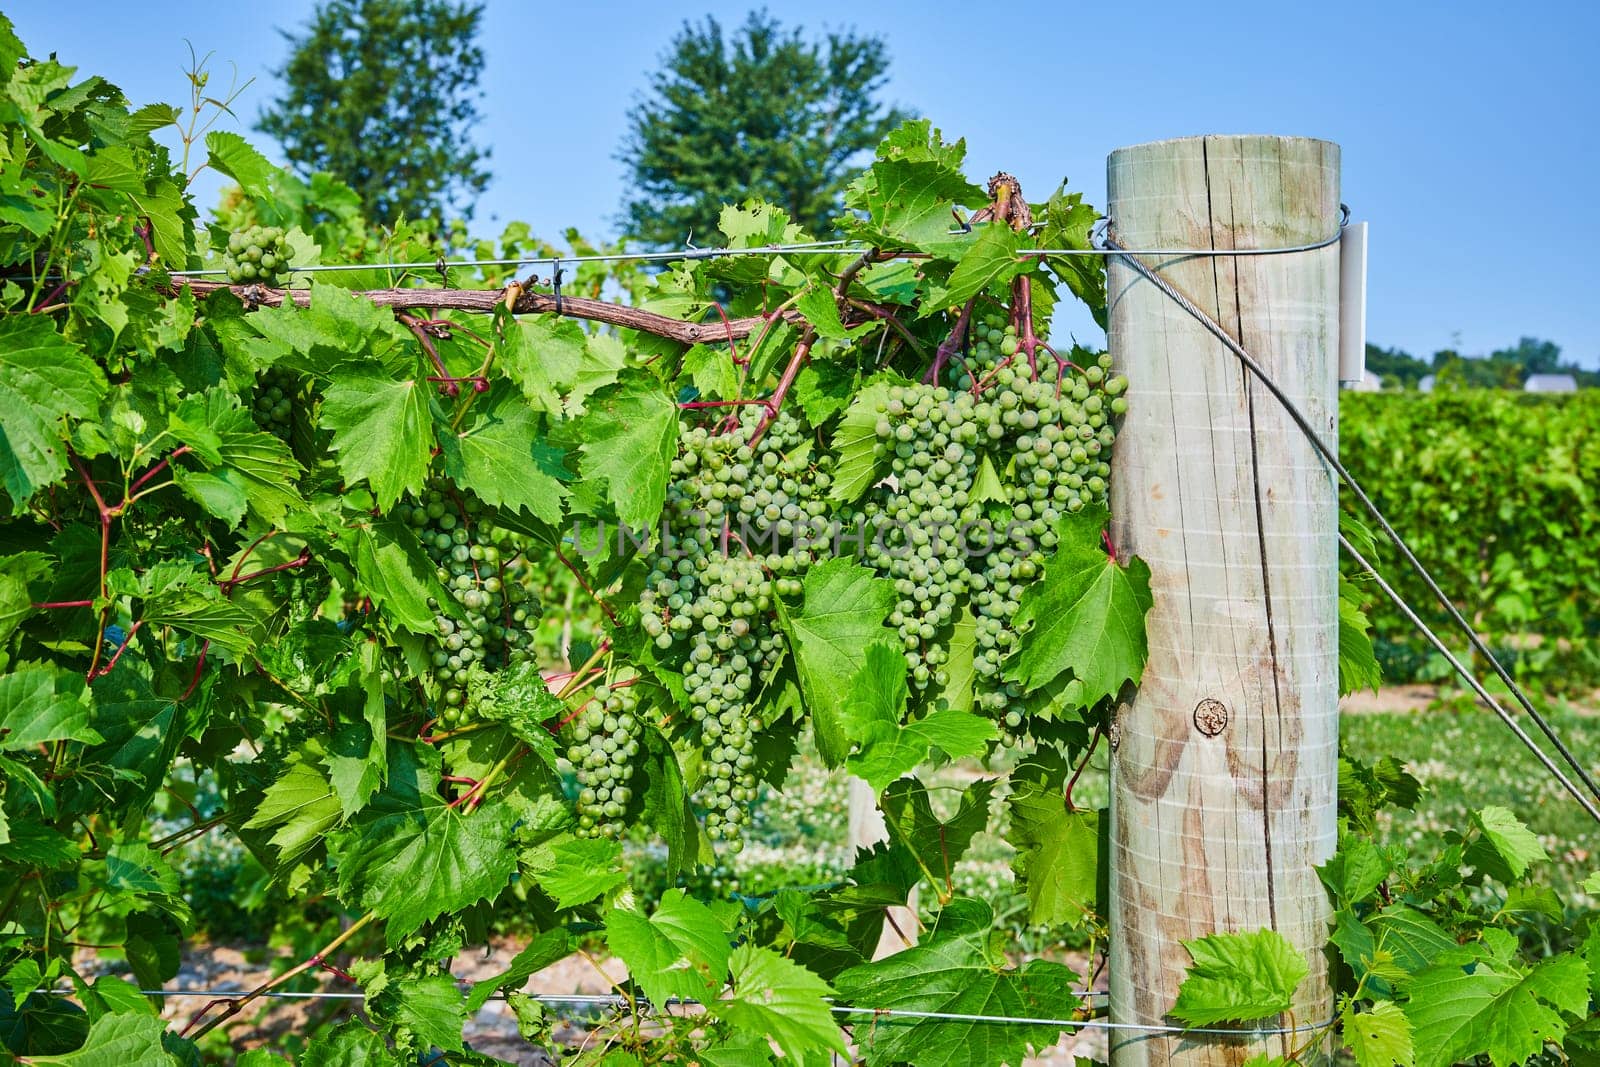 Image of Bundles of green grapes growing on the vine in vineyard with wooden pole